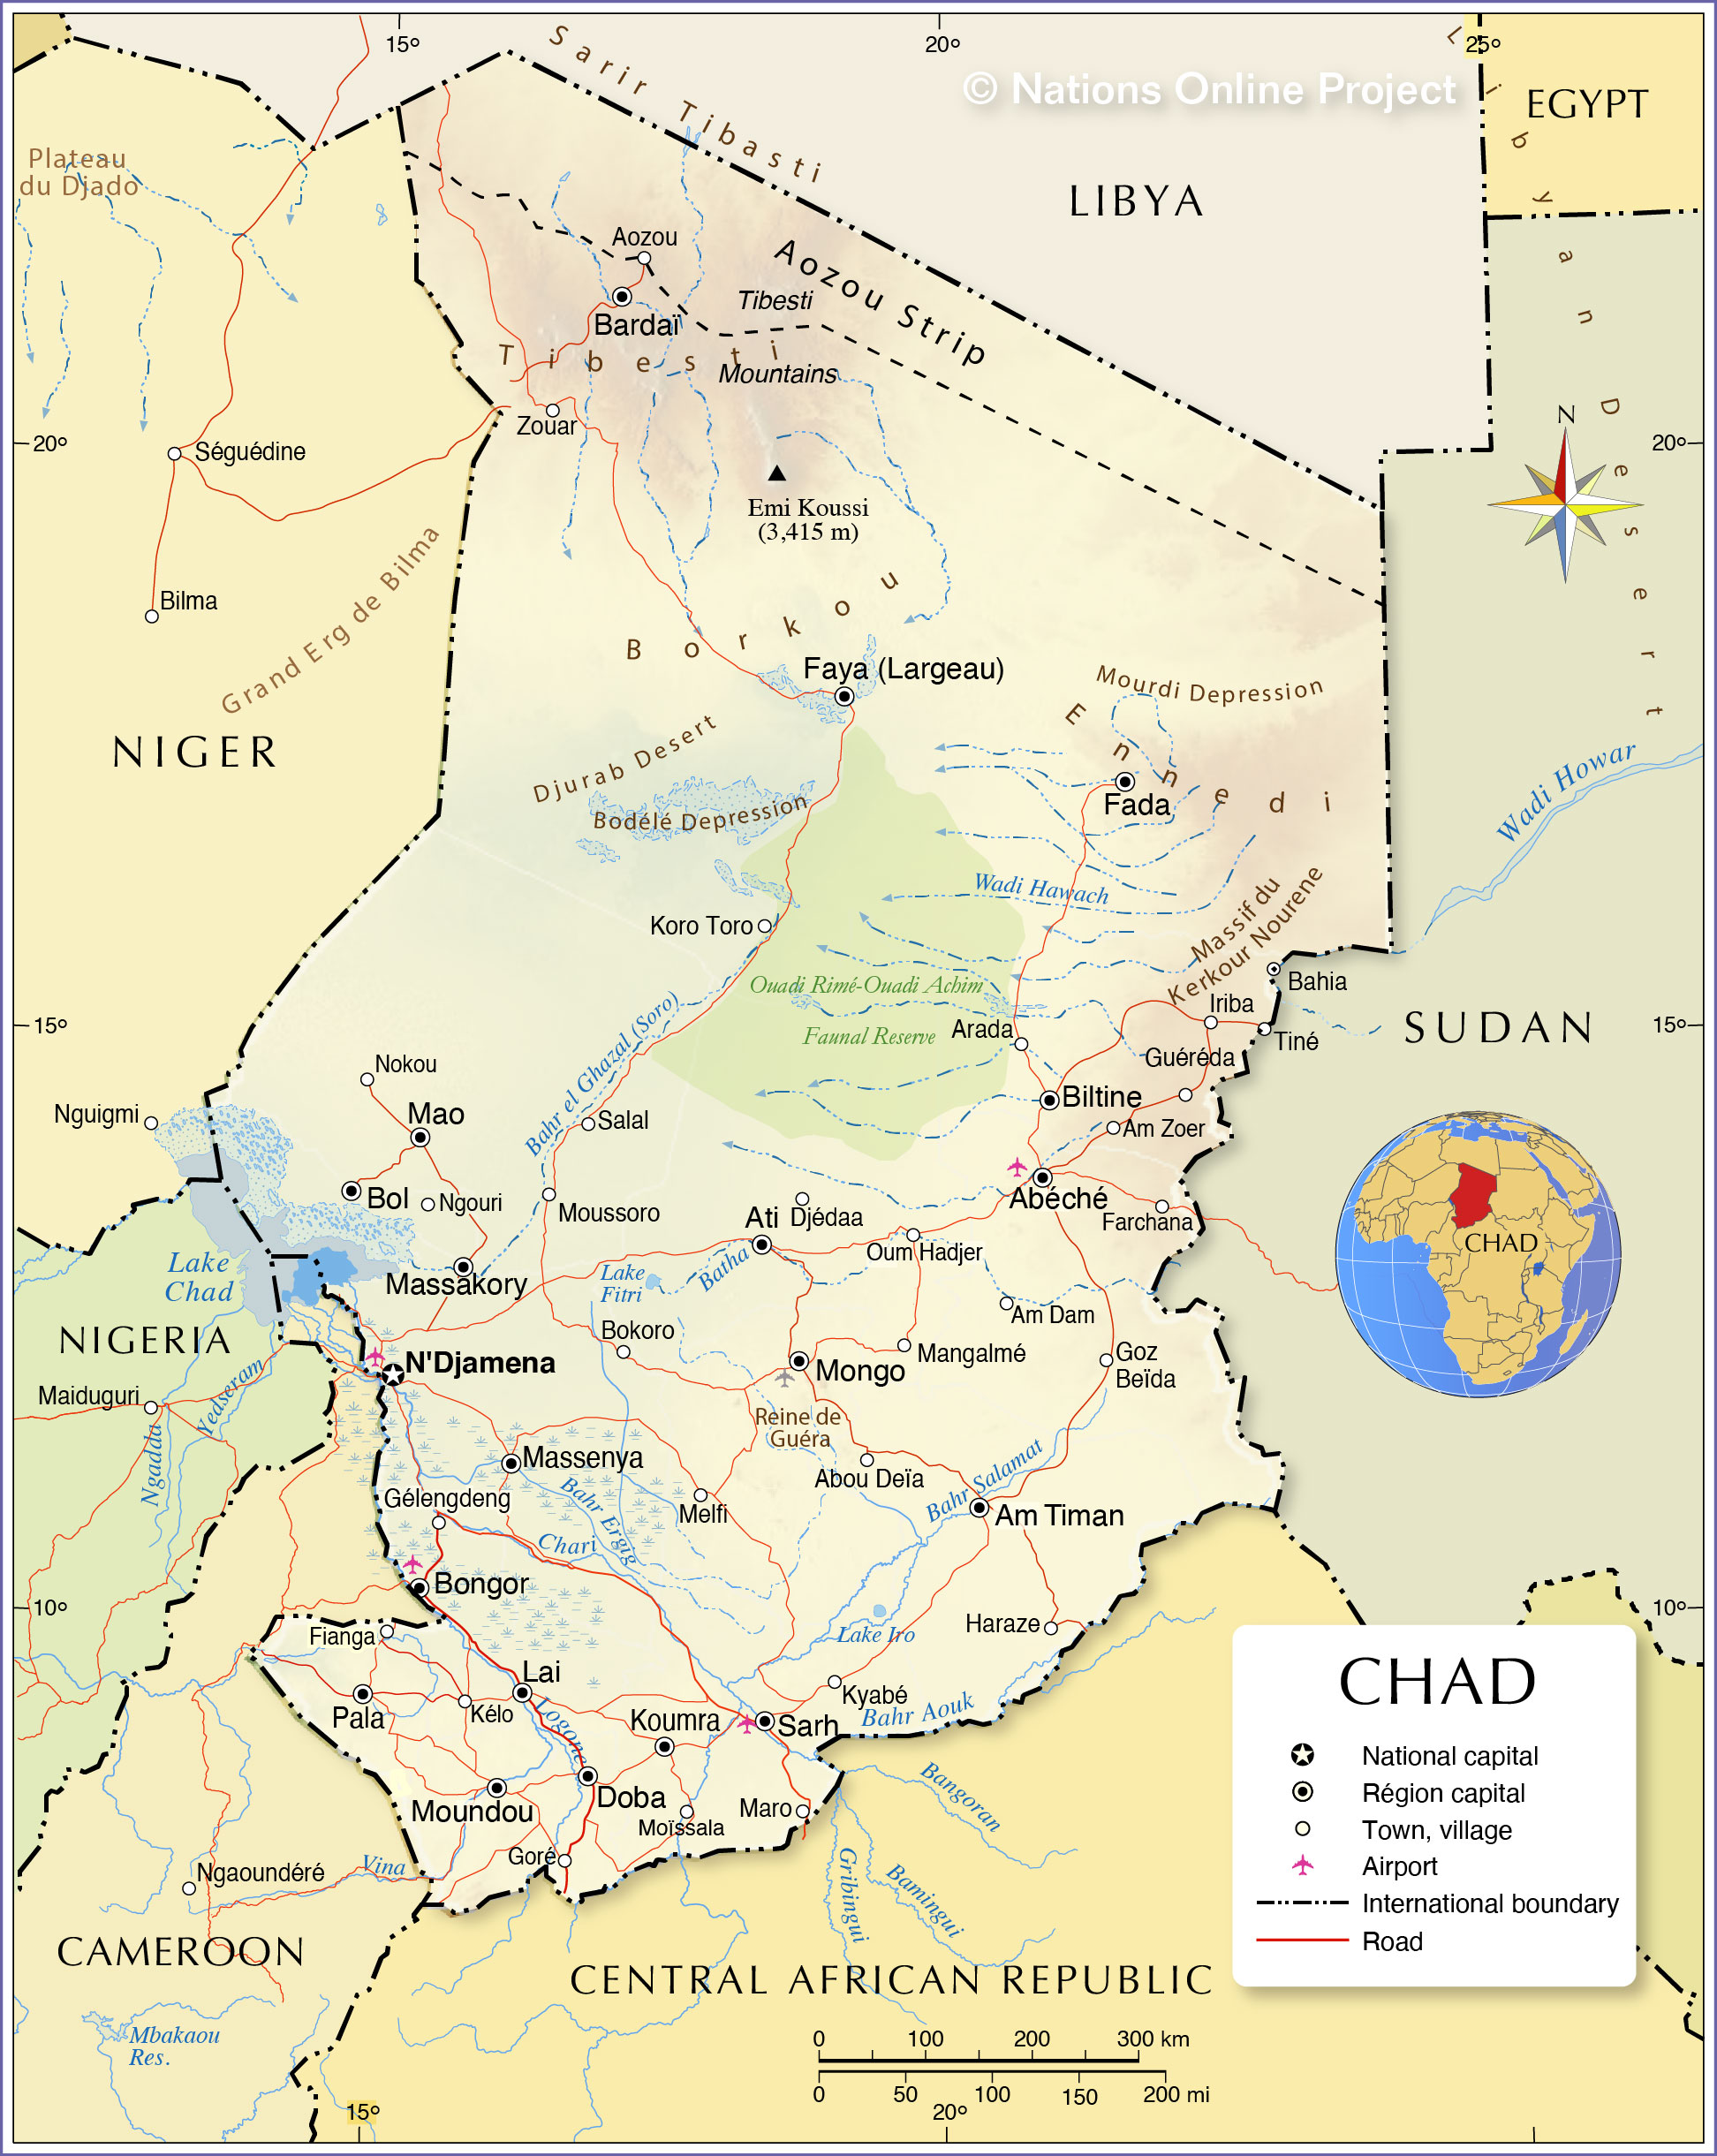 Political Map of Chad with topography